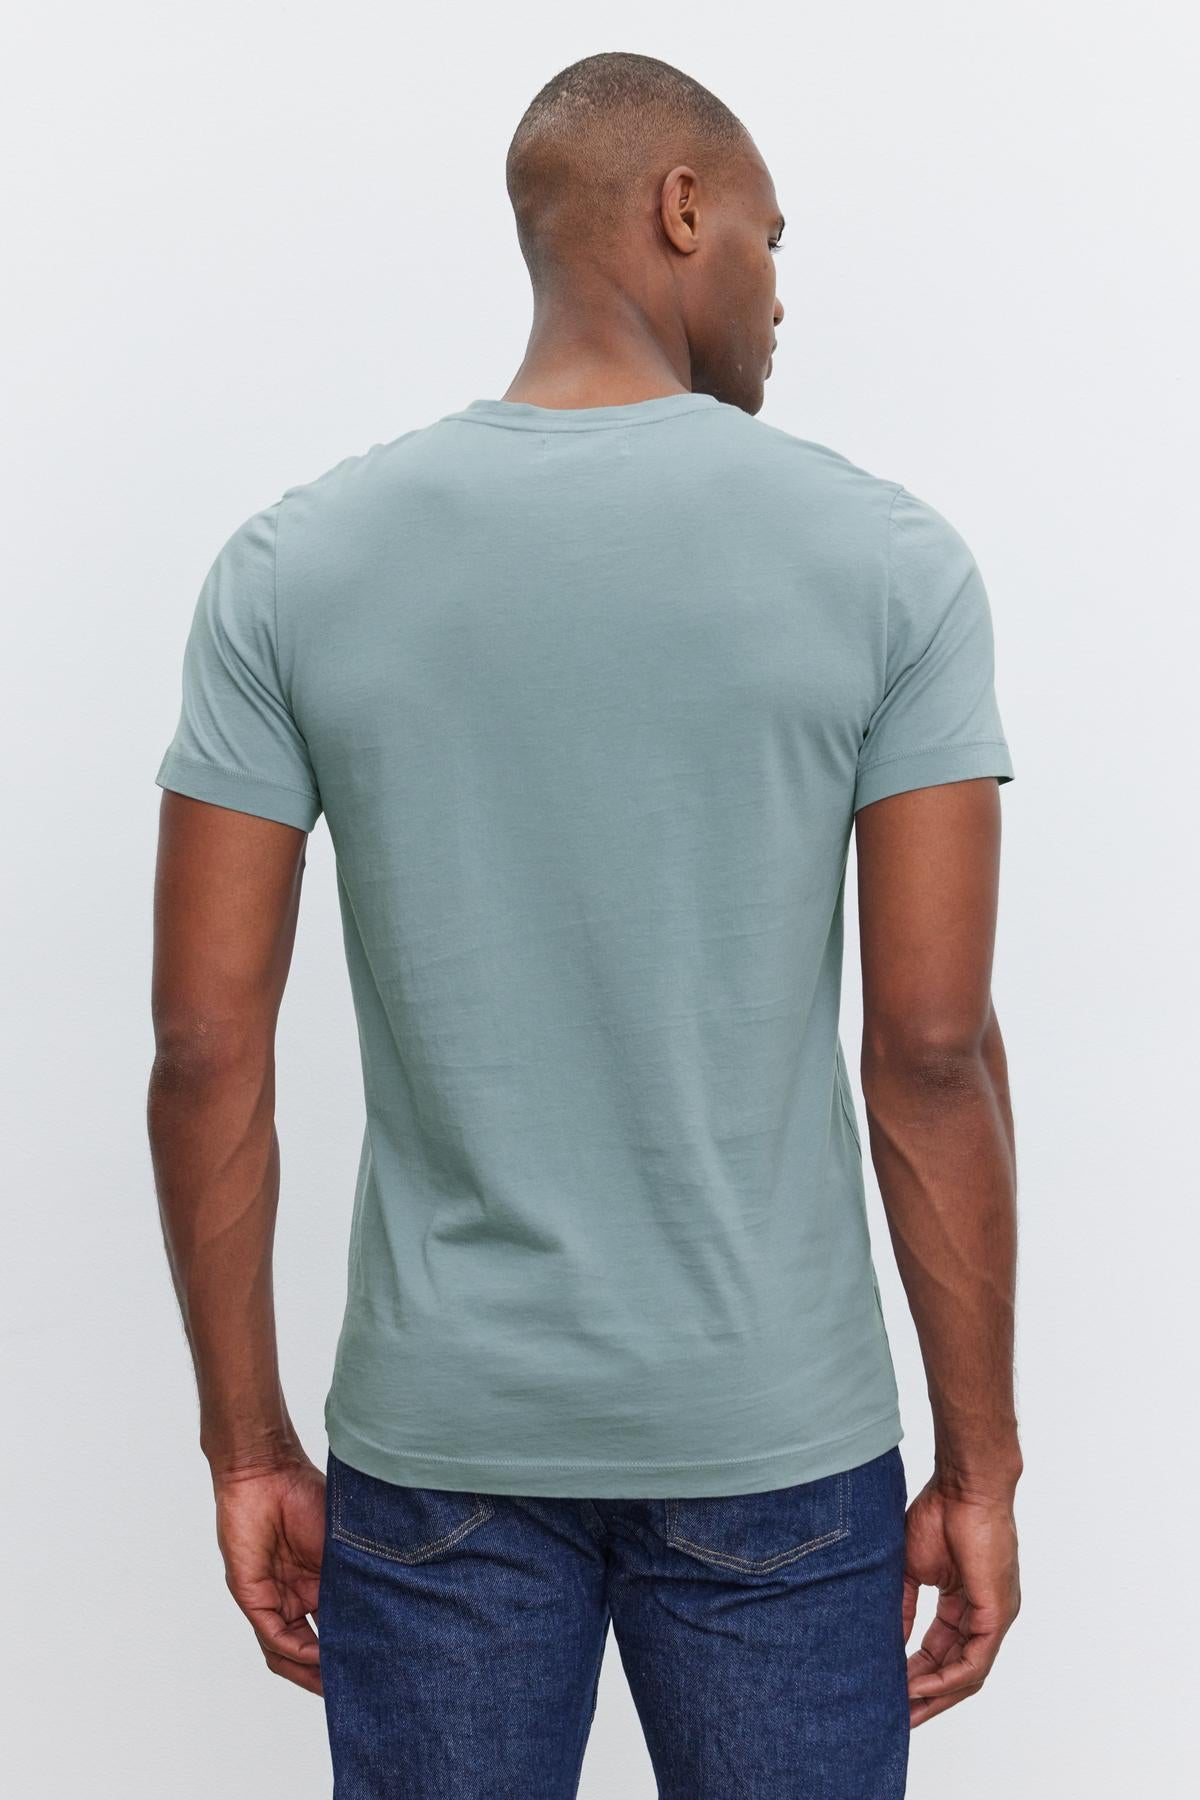   A person is standing with their back to the camera, wearing a light blue SAMSEN TEE by Velvet by Graham & Spencer and dark blue jeans against a plain white background. 